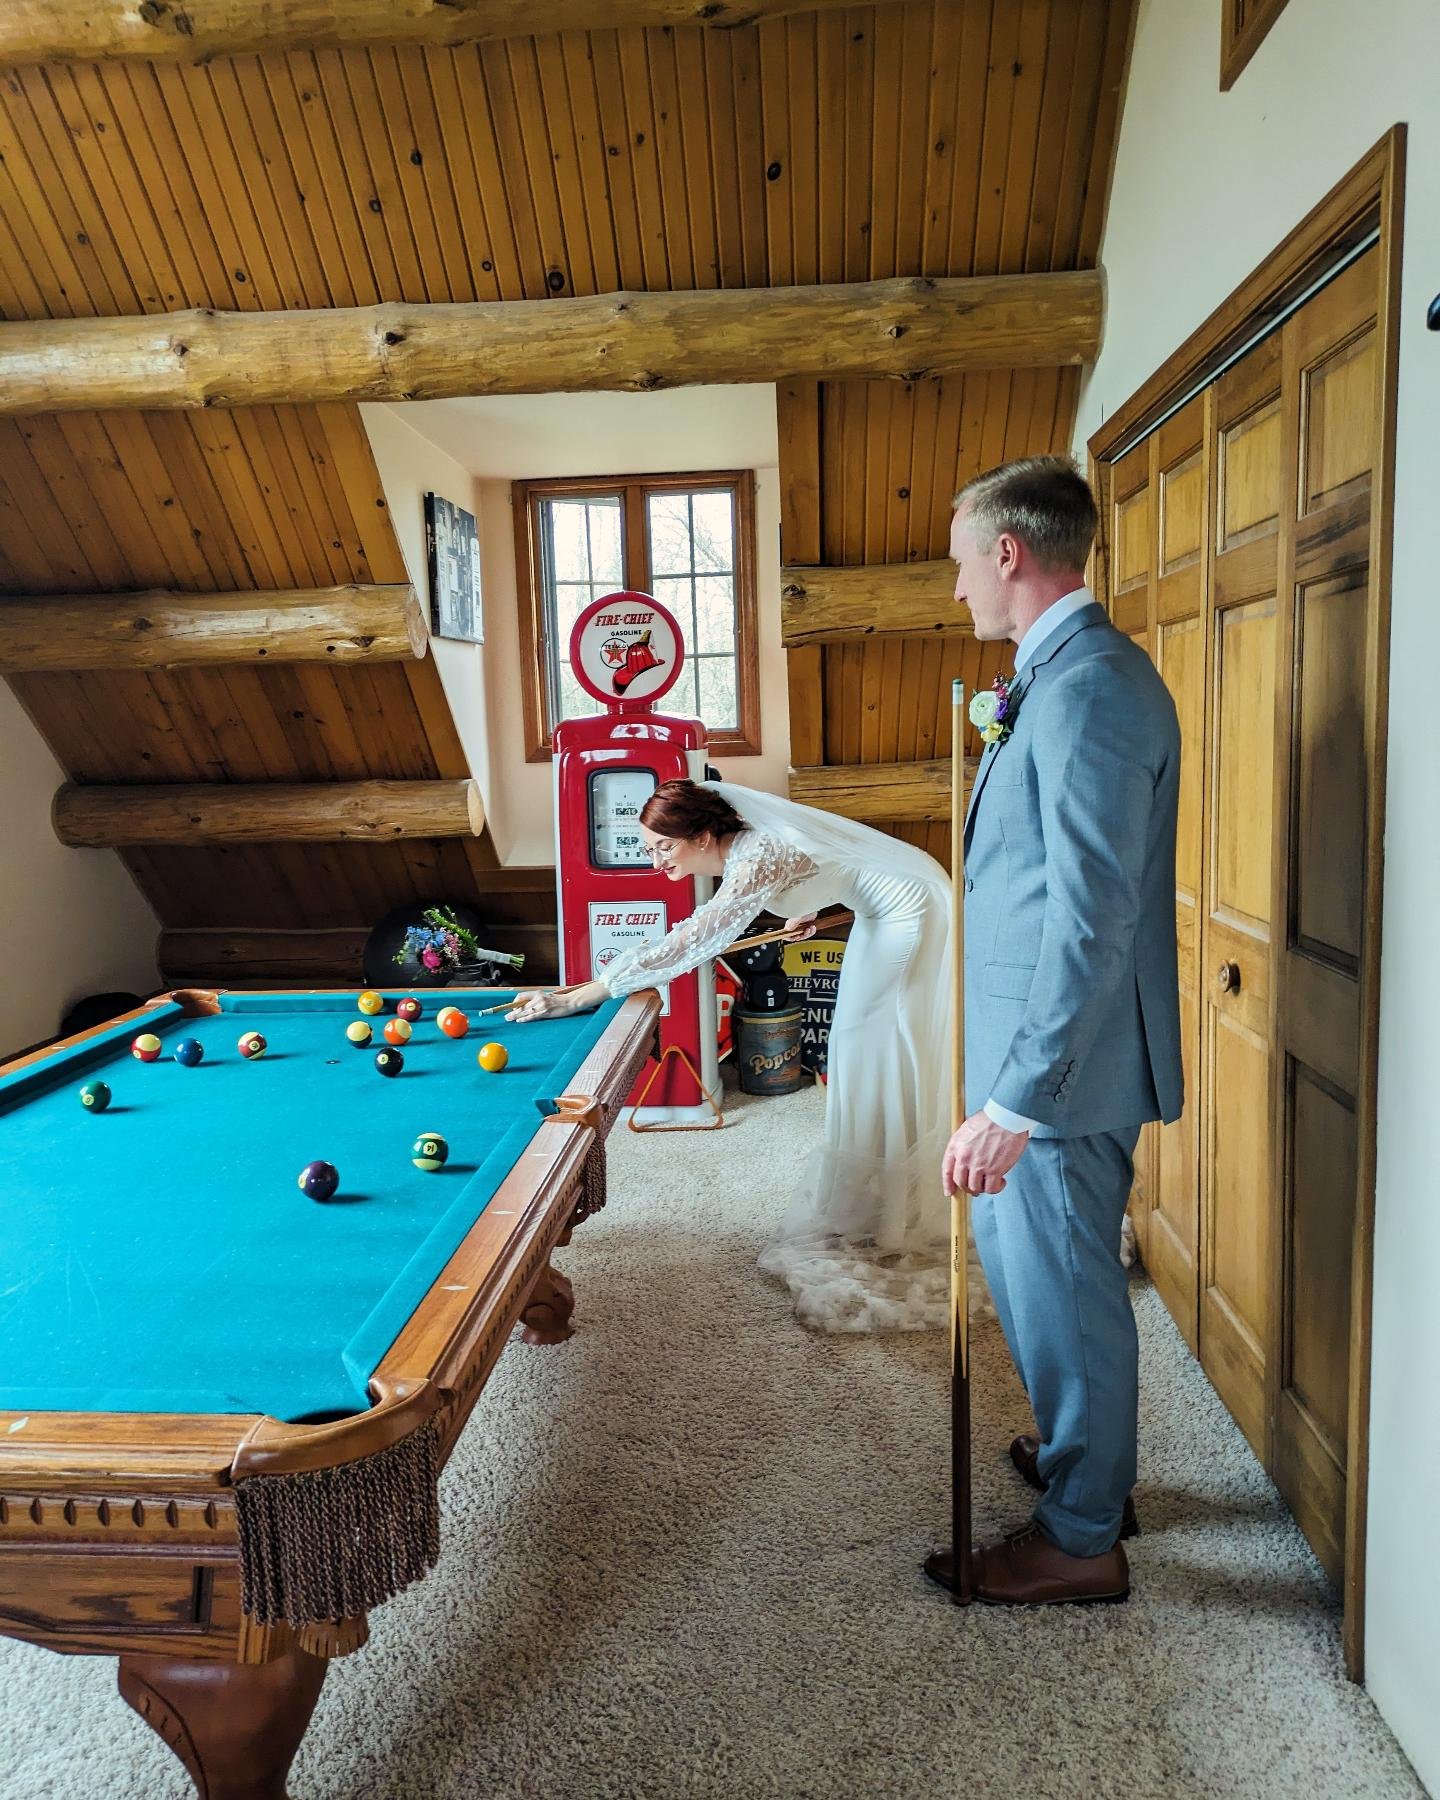 Just a quick game of pool before the &quot;I do's&quot;! 💞

Firm believers over here in &quot;those who play together, stay together&quot;. 😘

Congratulations Emily and Taylor!! 

#rsvpeventsgr #weddingday #weddingplanning #grandrapidsweddingplanne